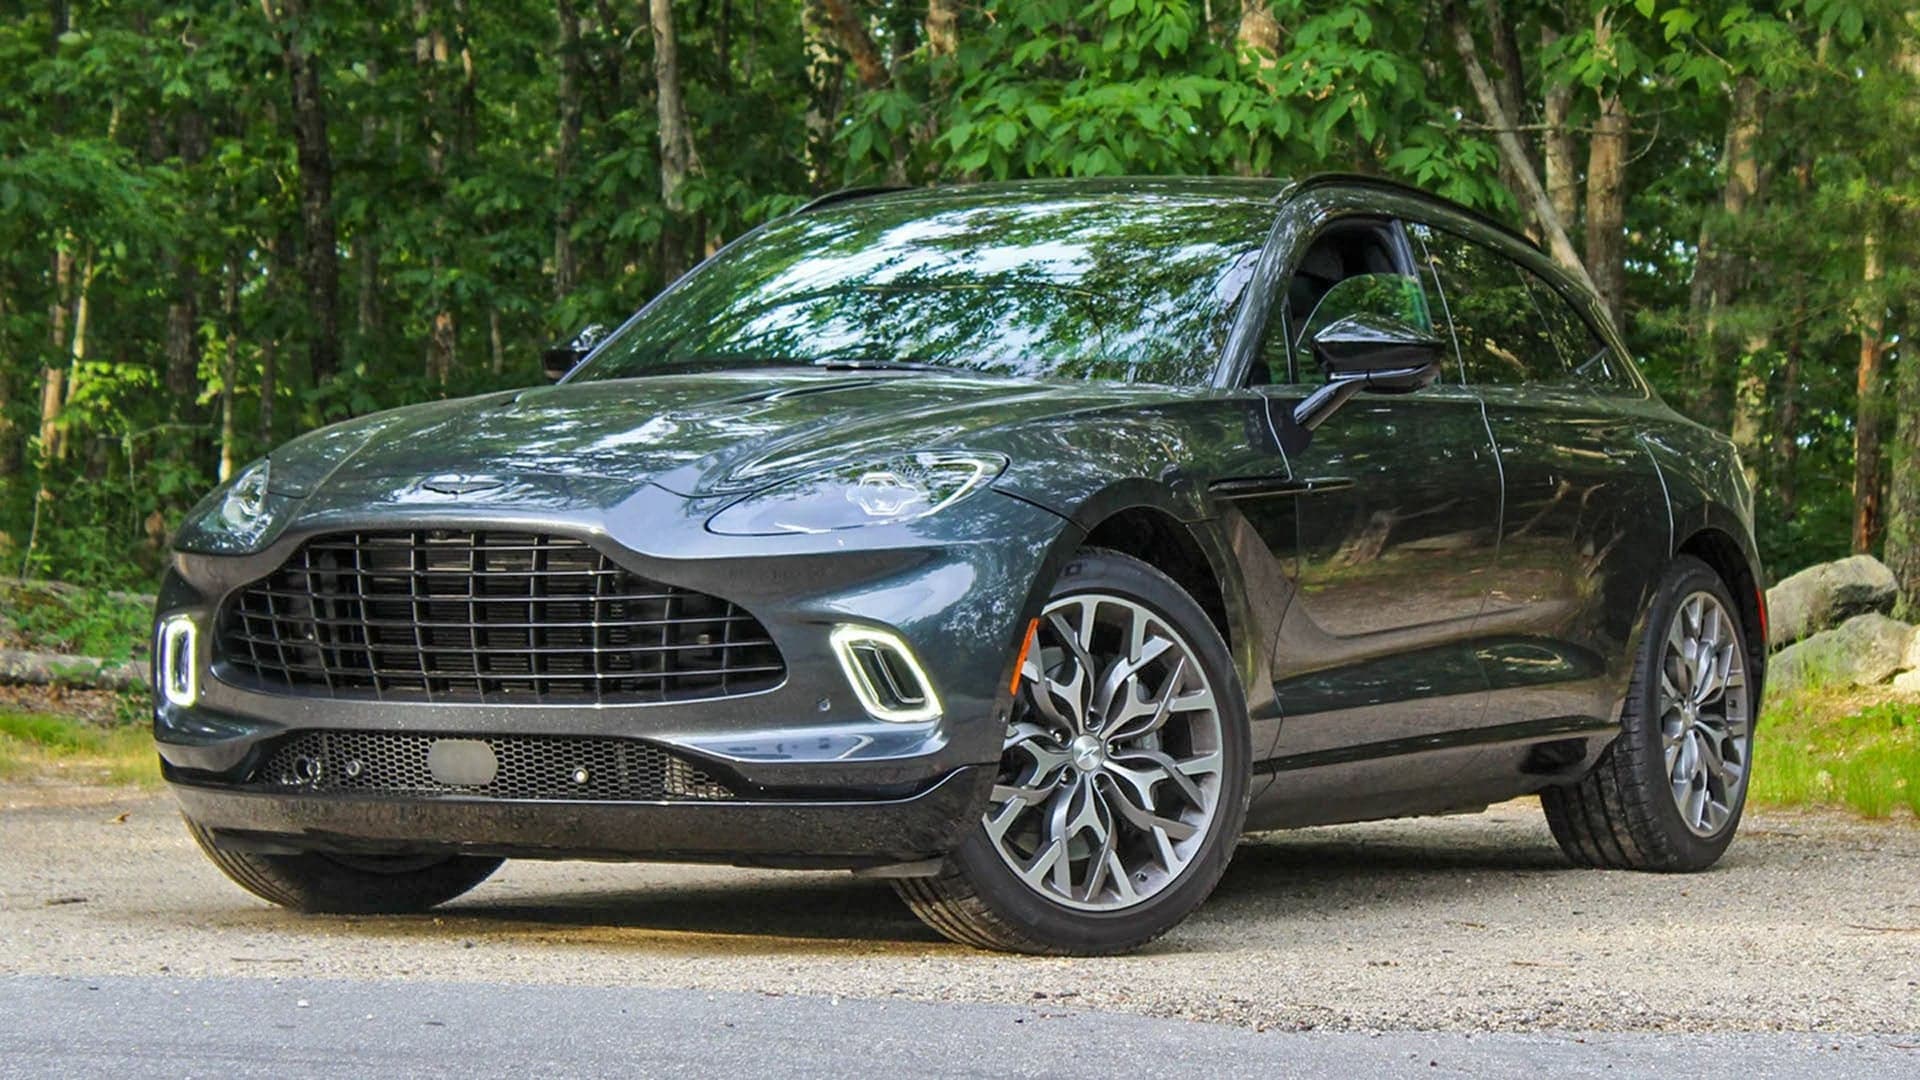 2021 Aston Martin DBX Review: Classic Luxury in a Modern SUV, for Better and for Worse